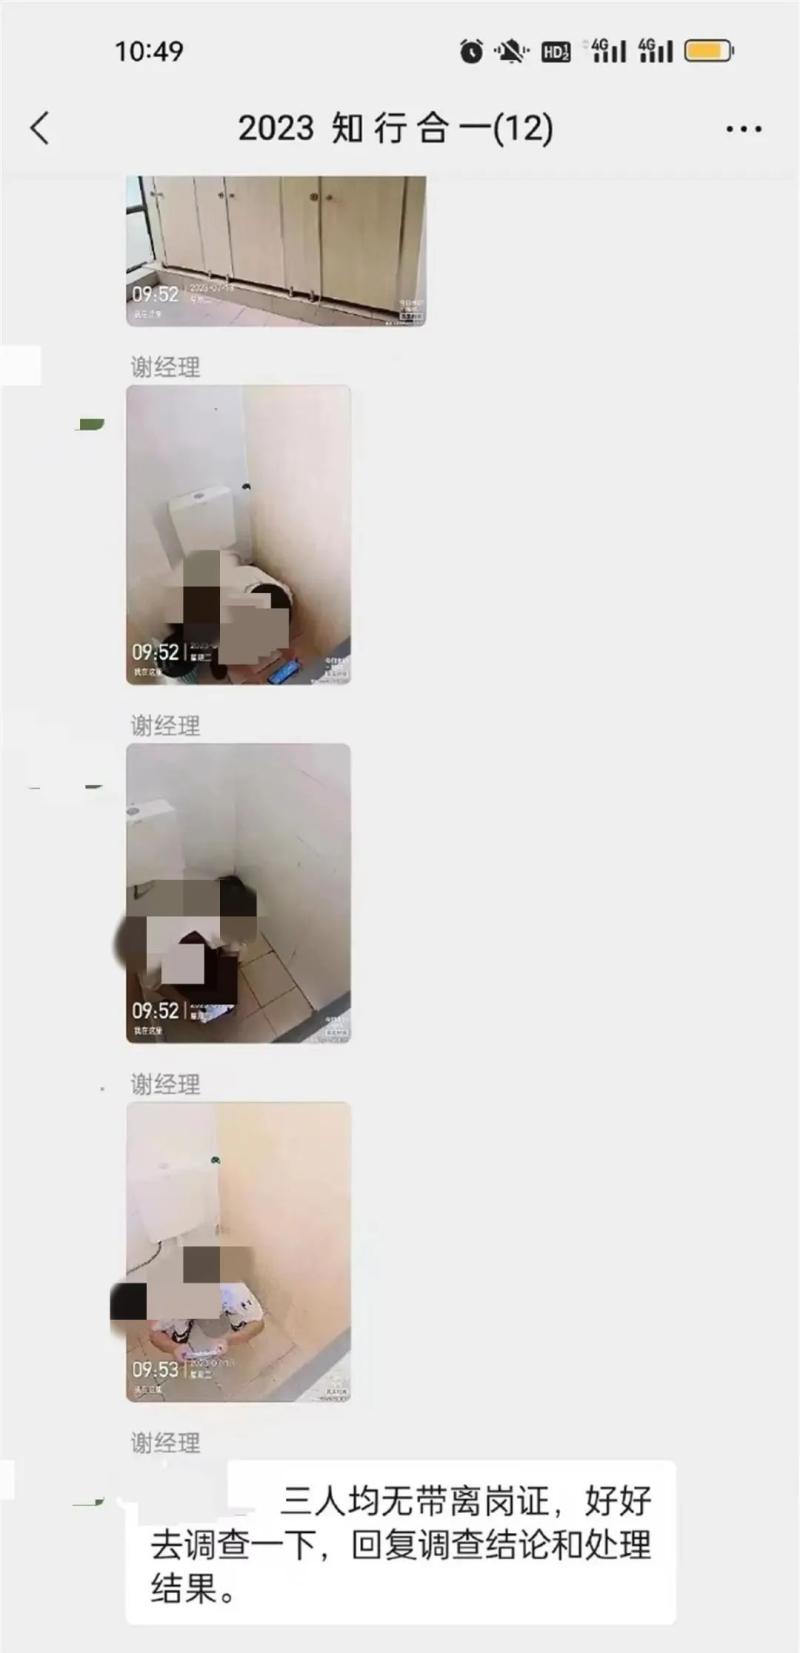 Does the company take photos and post them to the group for toilet safety monitoring? Police response photo | Company | Toilet